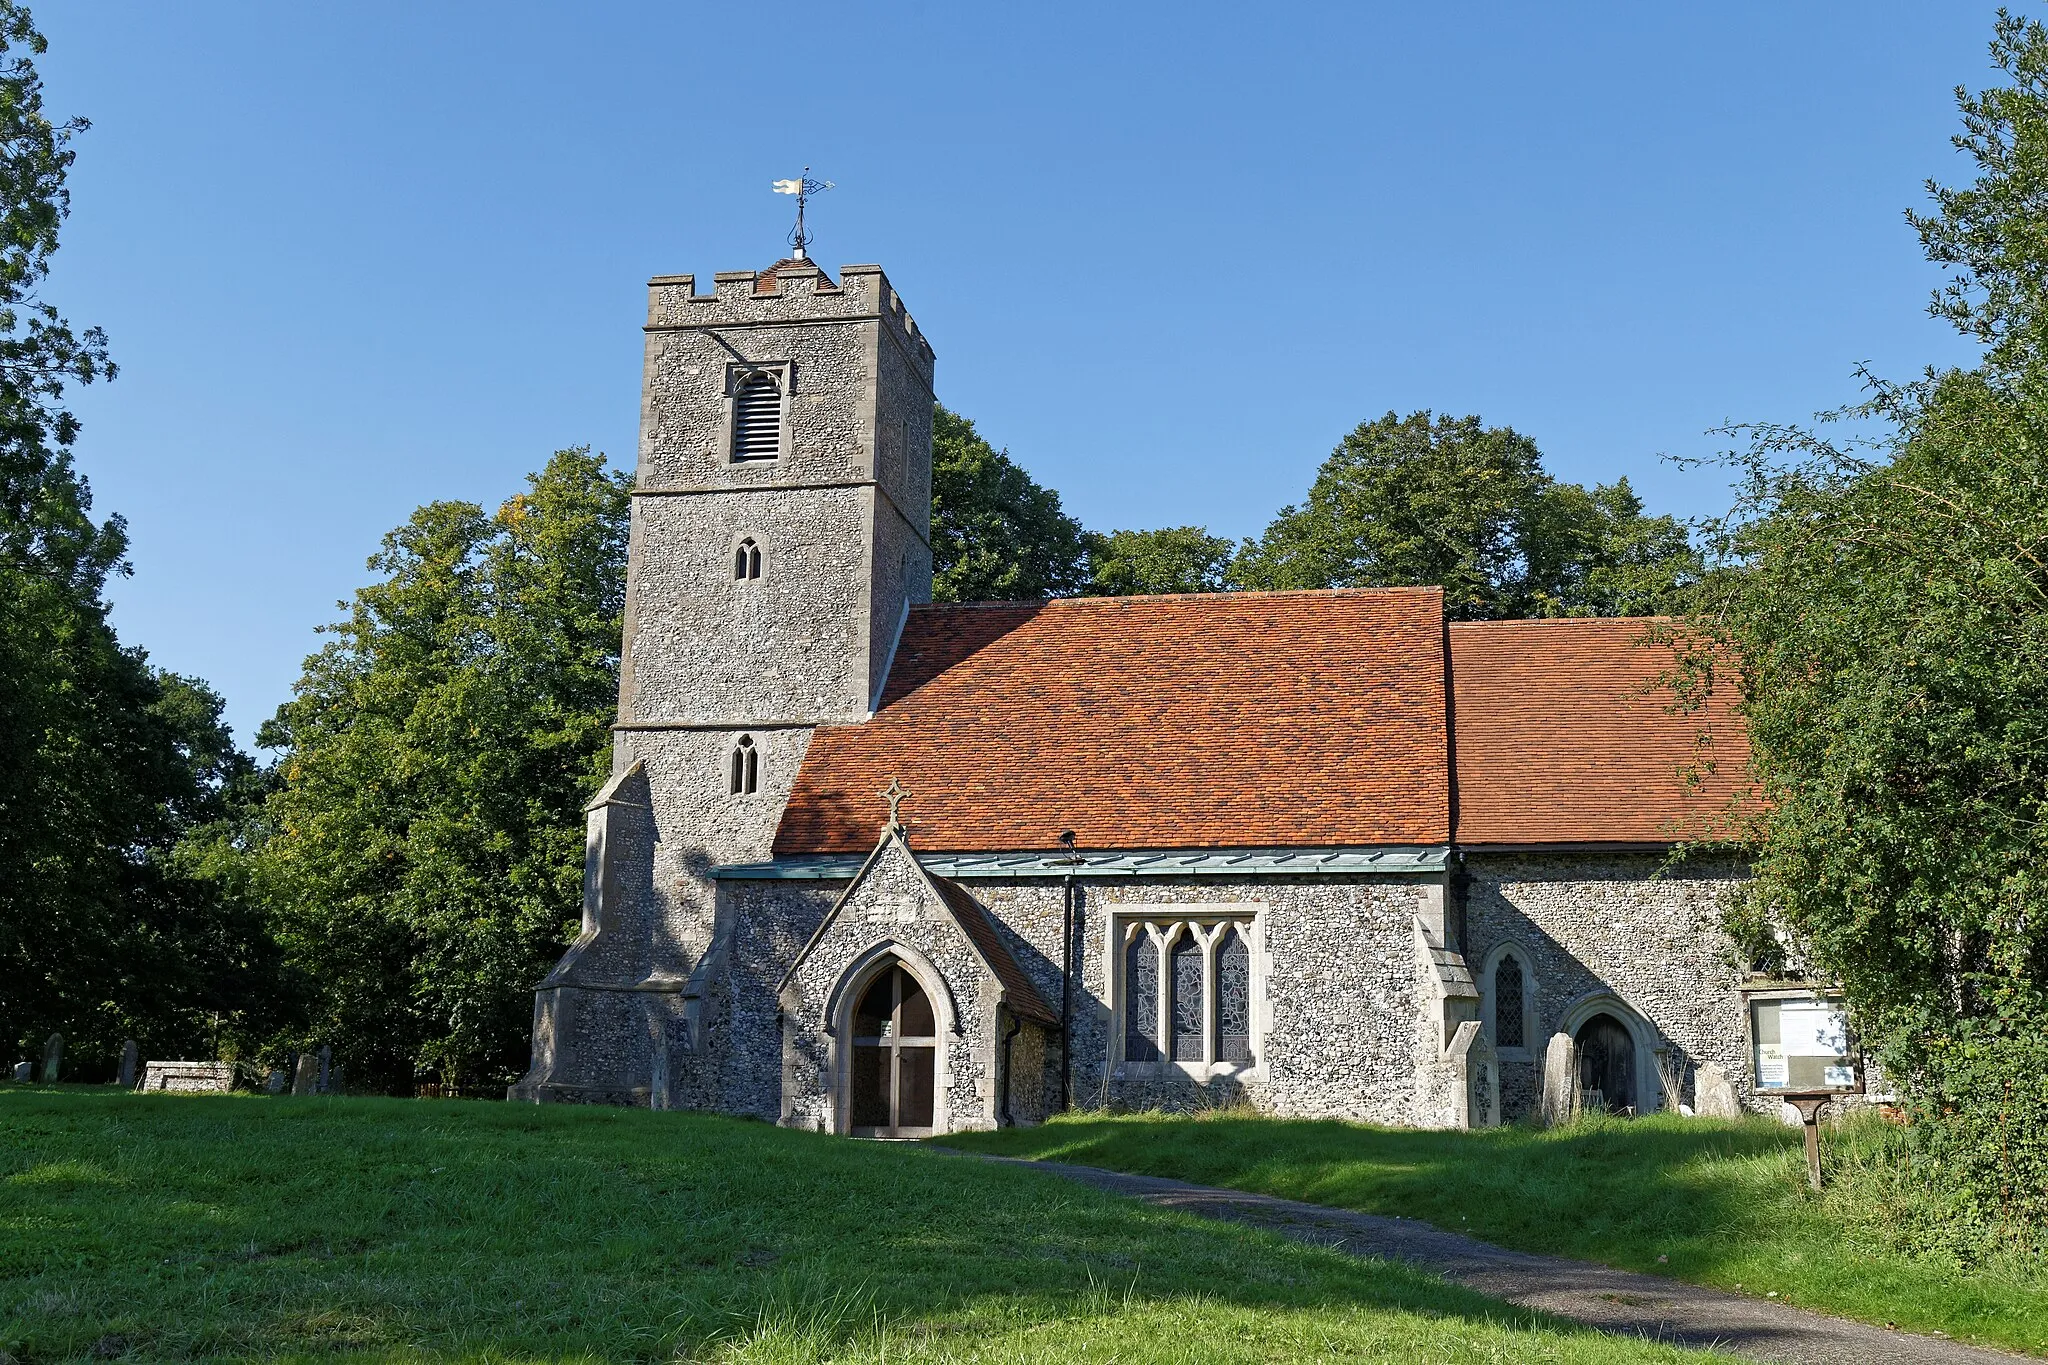 Photo showing: All Saints' parish church, Rickling, Essex, England, seen from the south. Software: RAW file lens-corrected, optimized and converted to JPEG with DxO OpticsPro 10 Elite, and likely further optimized and/or cropped and/or spun with Adobe Photoshop CS2.